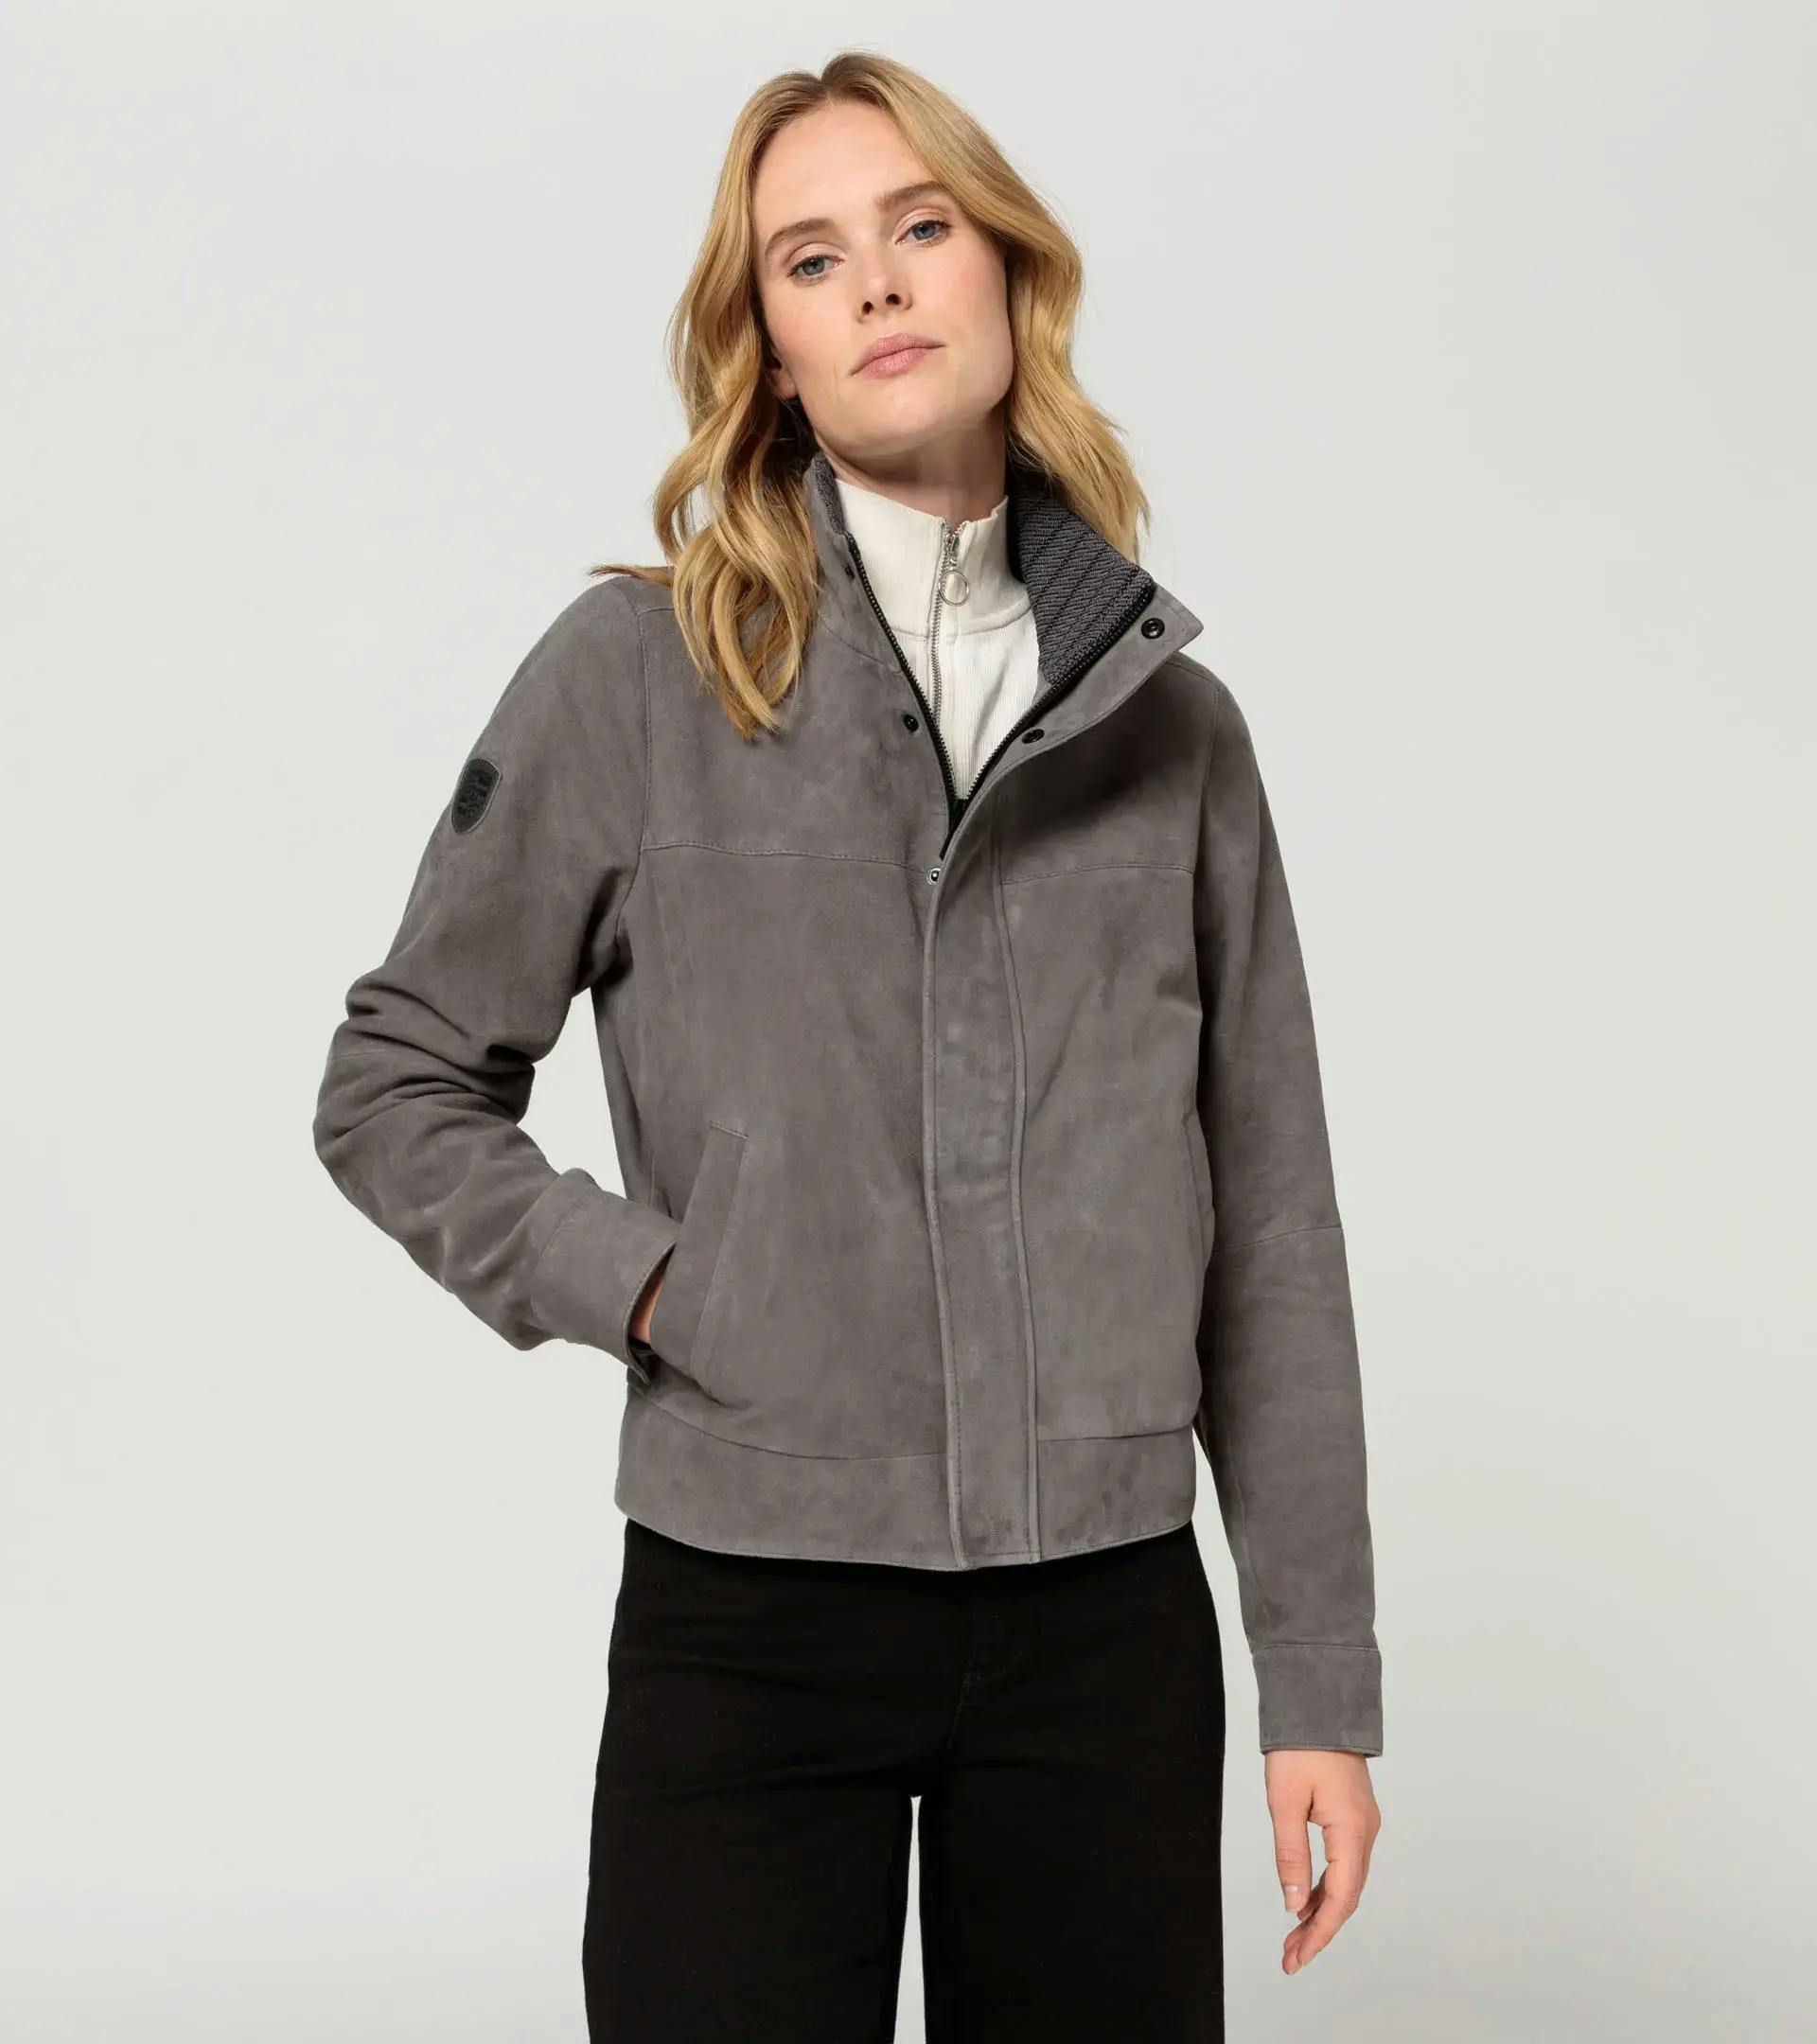 Superdry Women's Knit Collar Leather Bomber Jacket